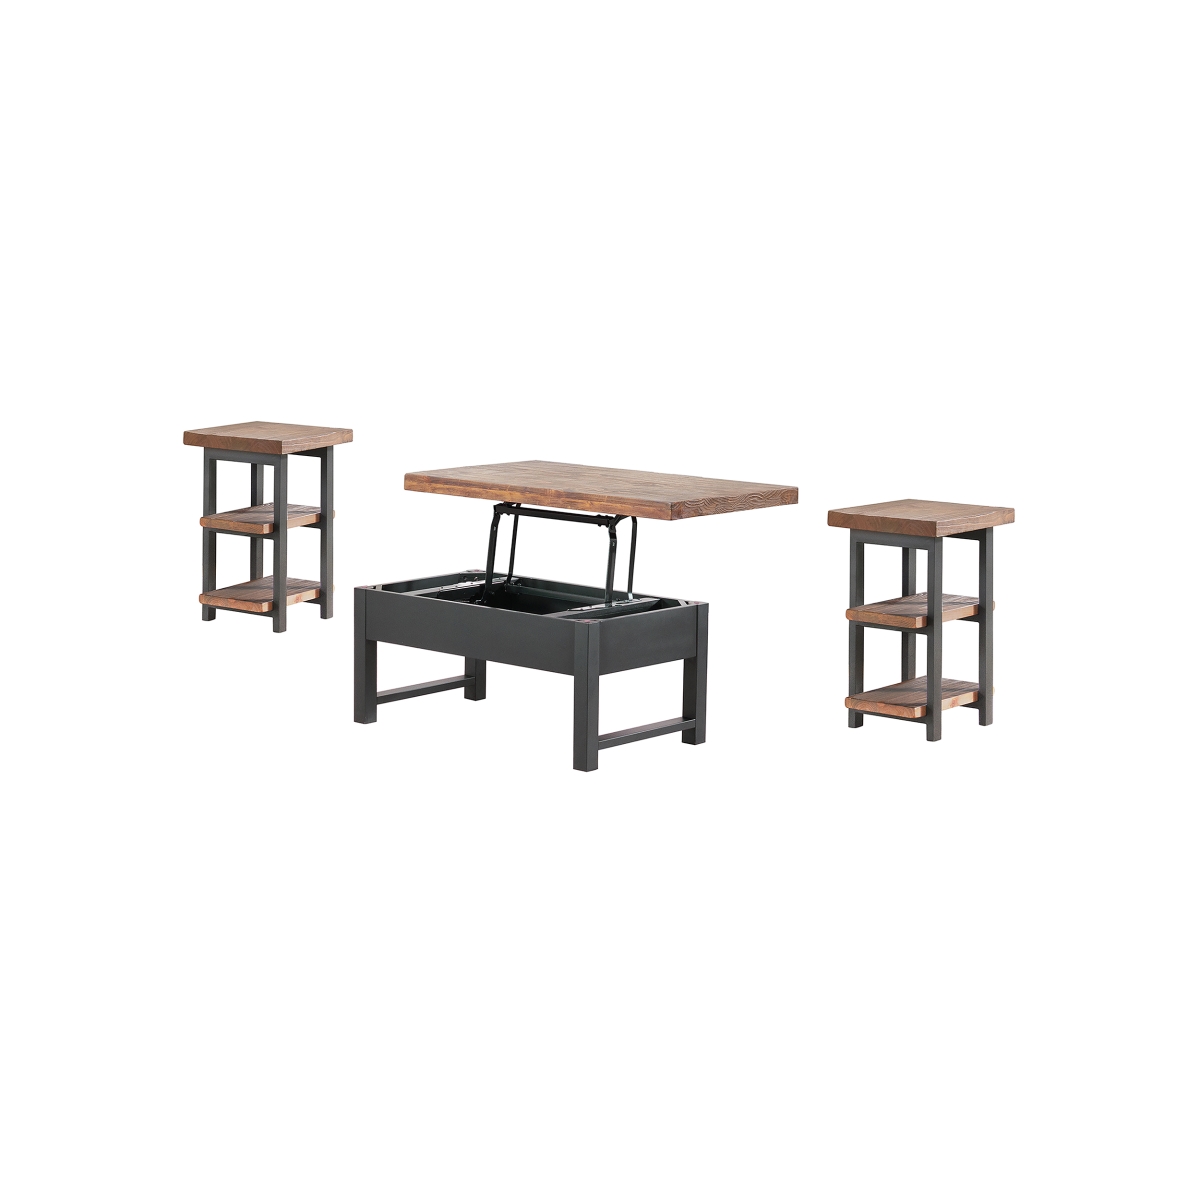 Picture of Alaterre AMBA021120LT 42 in. Pomona Living Room Set with Lift Top Coffee & Two End Tables with Shelves - 3 Piece